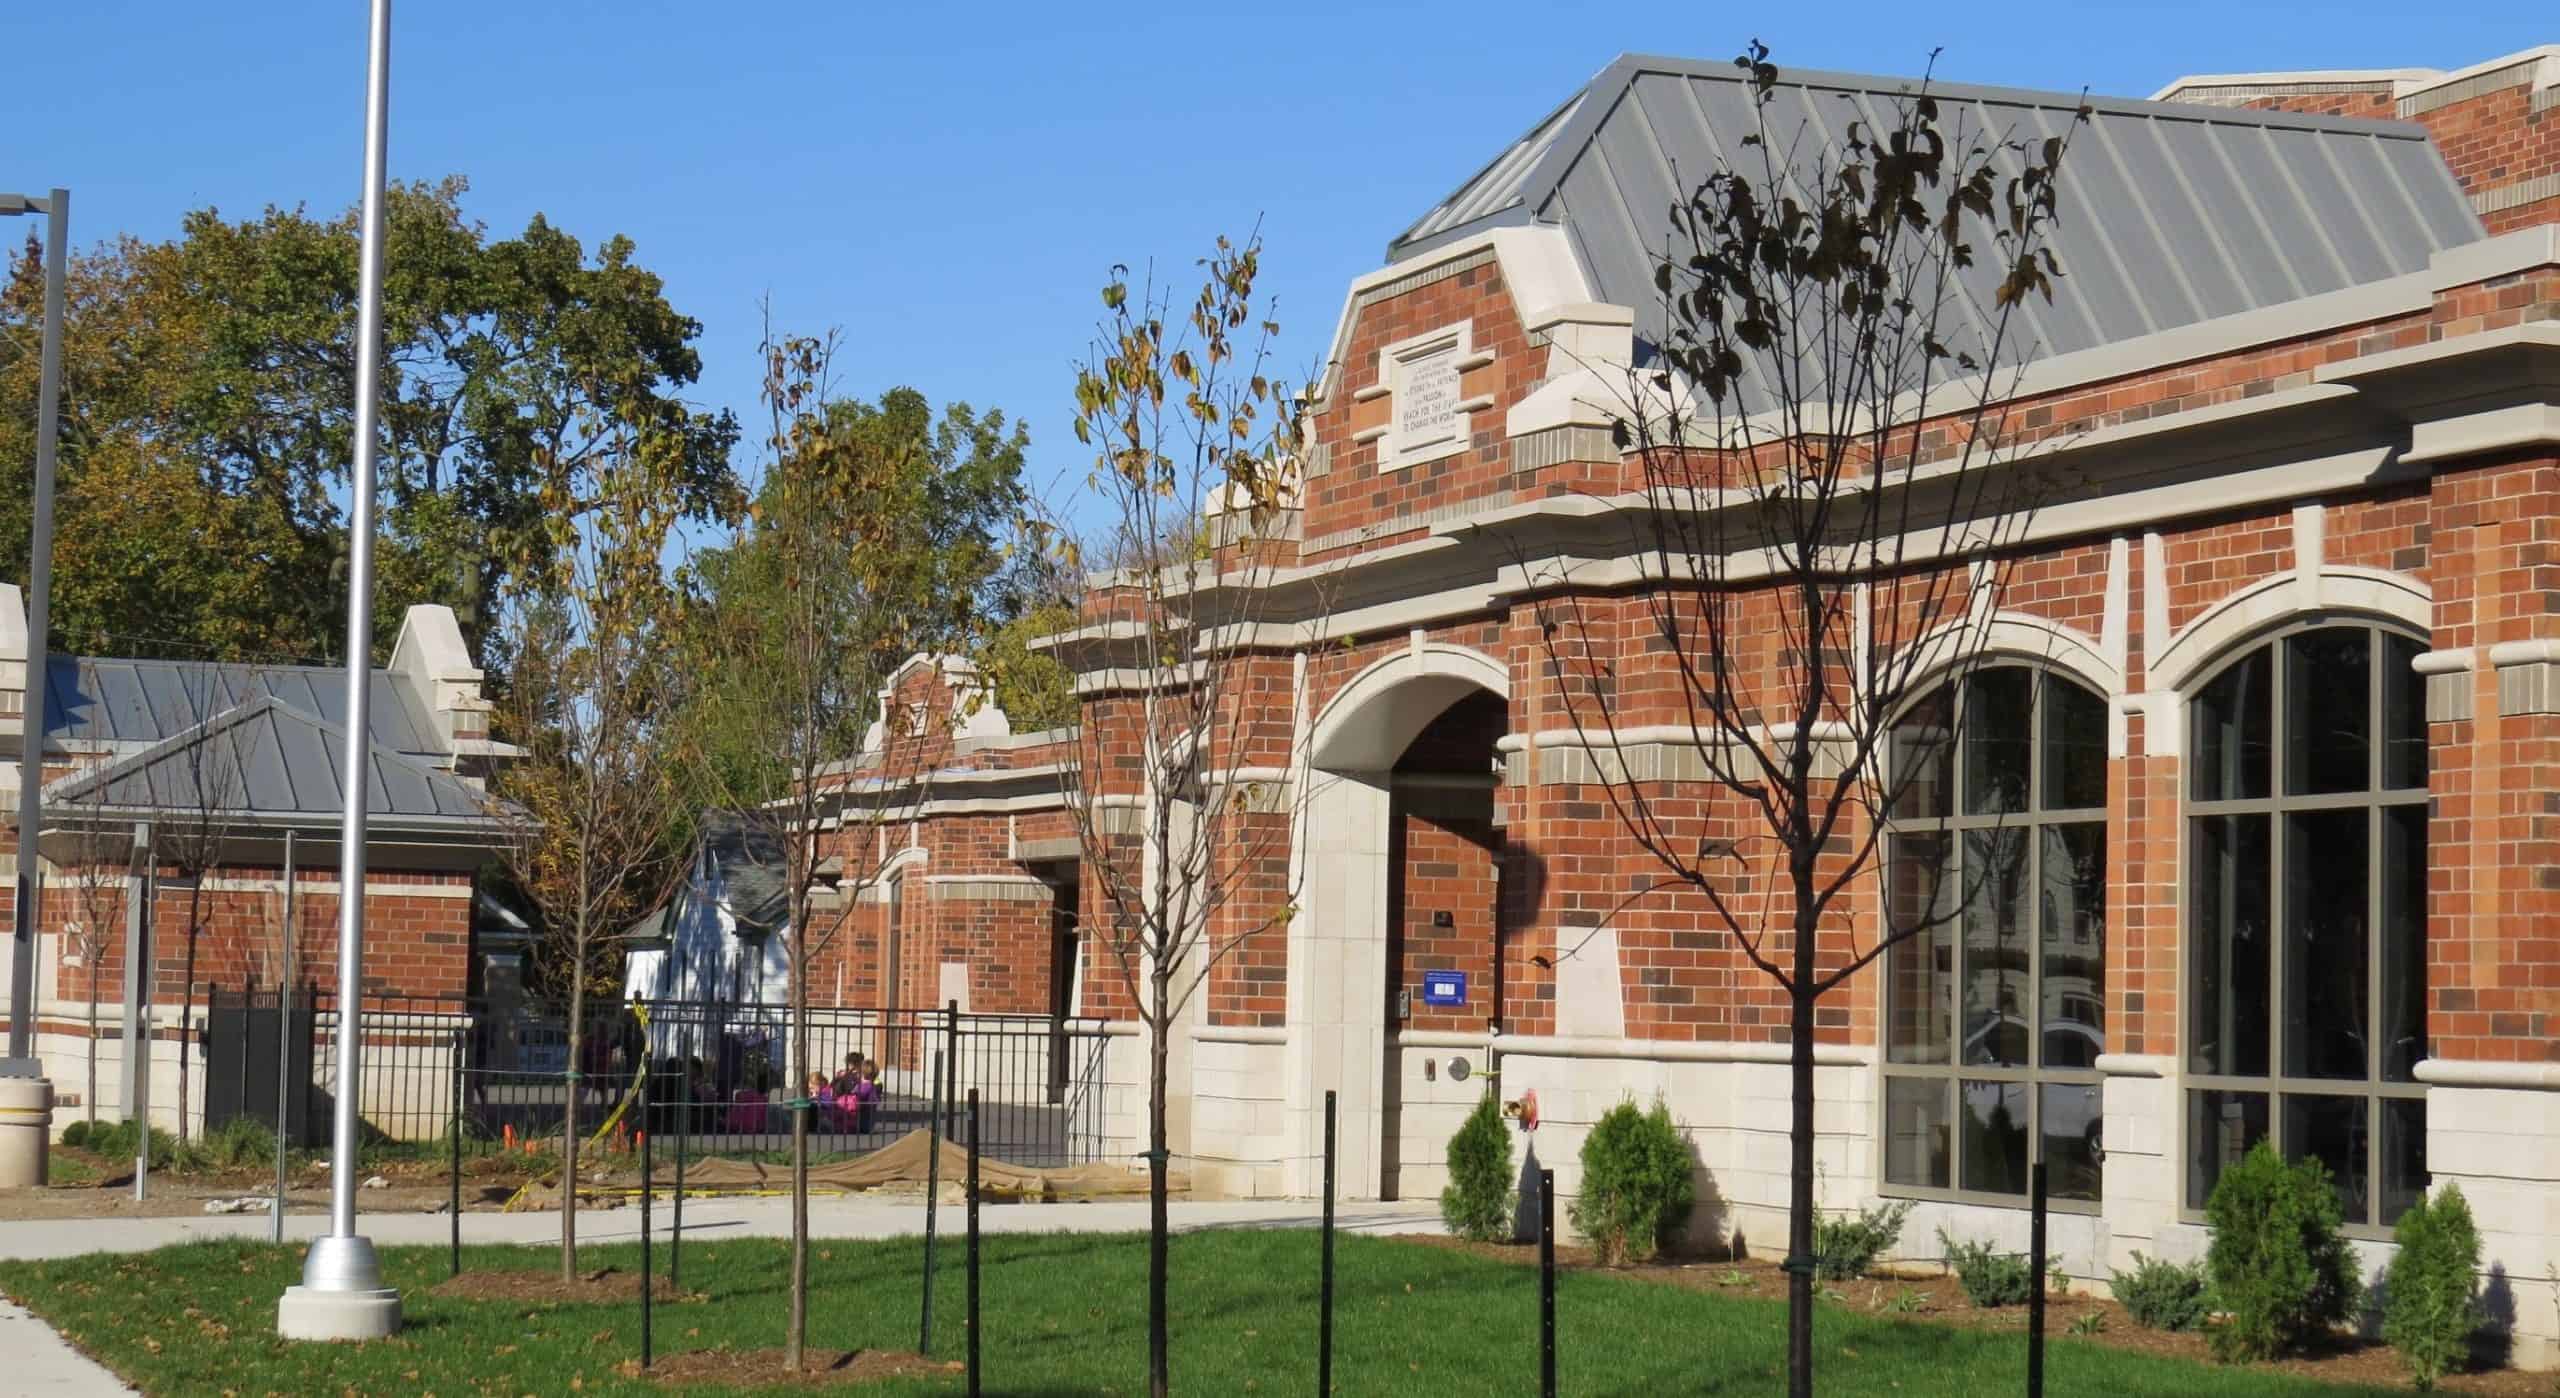 Minors from St. Catharines, Niagara Falls charged in hate vandalism at Harriet Tubman Public College